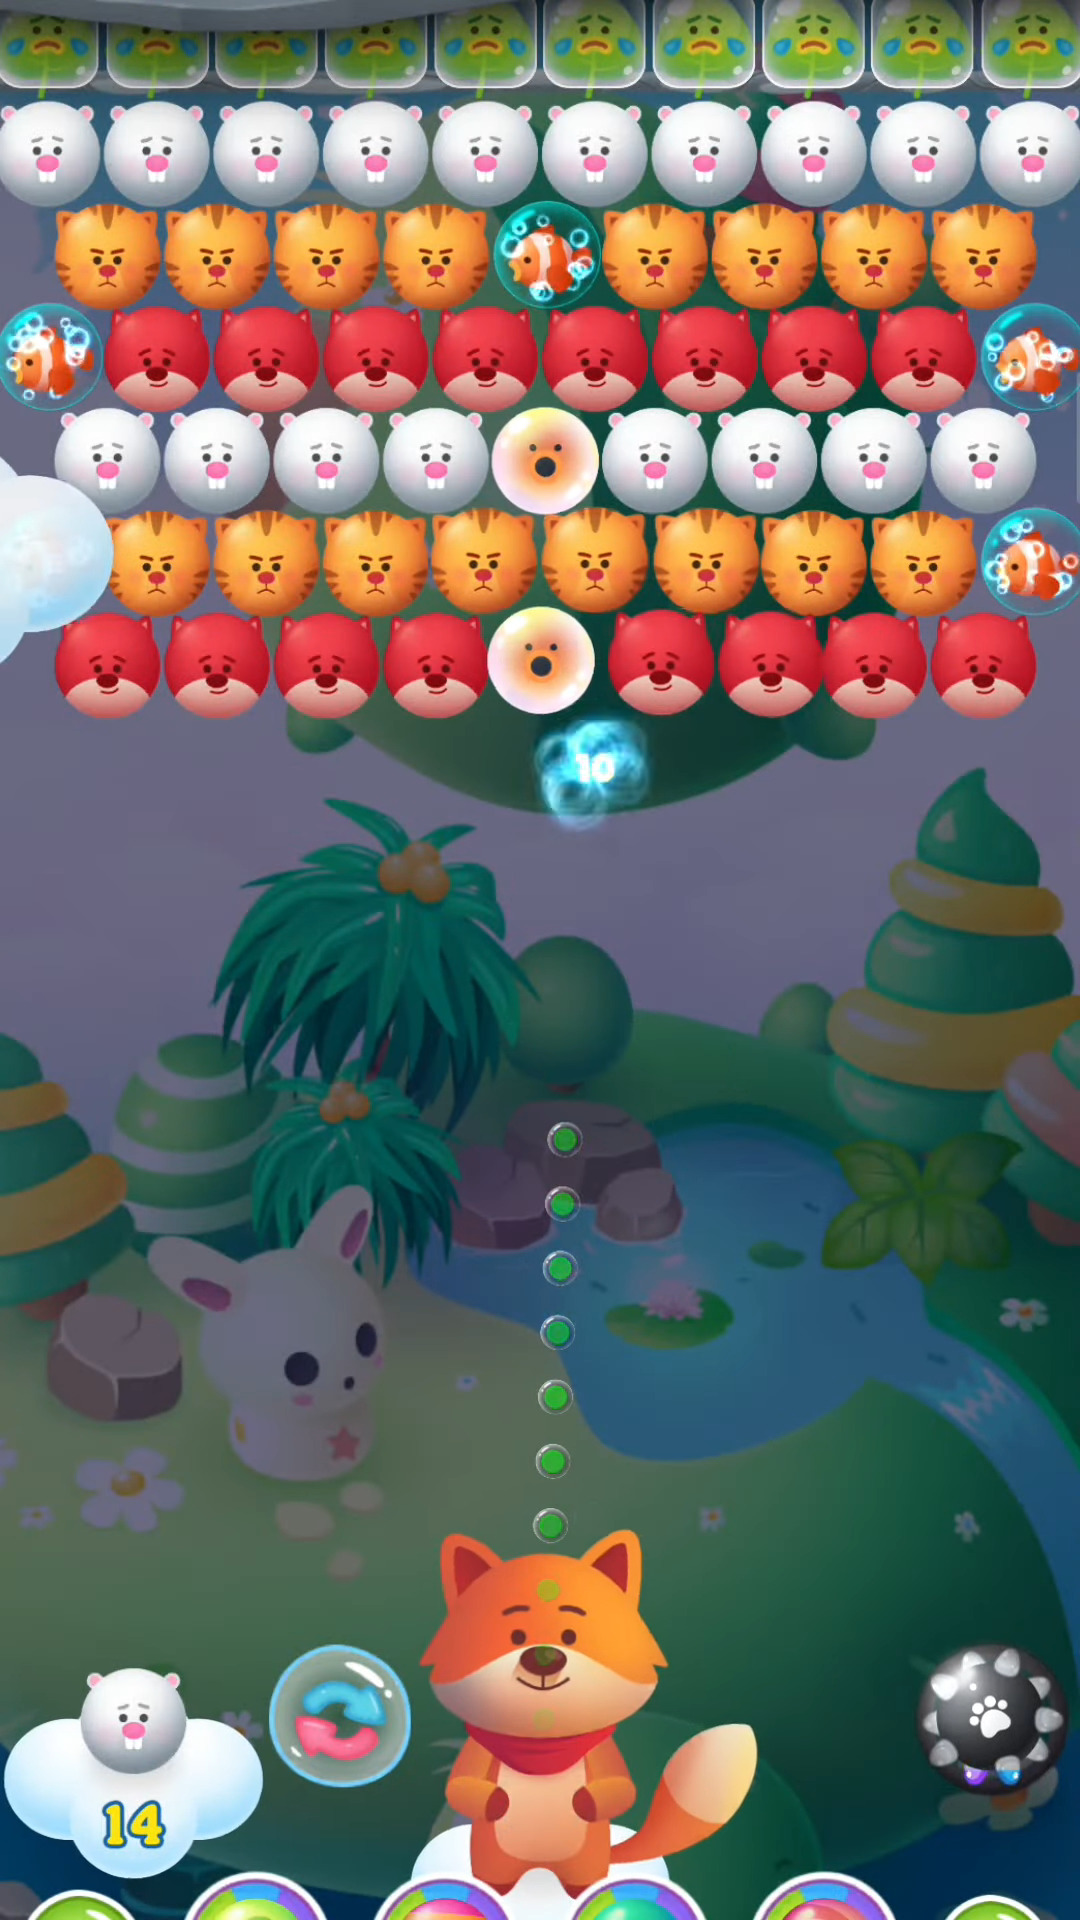 Gameplay of the Bubble Shooter : Animals Pop for Android phone or tablet.